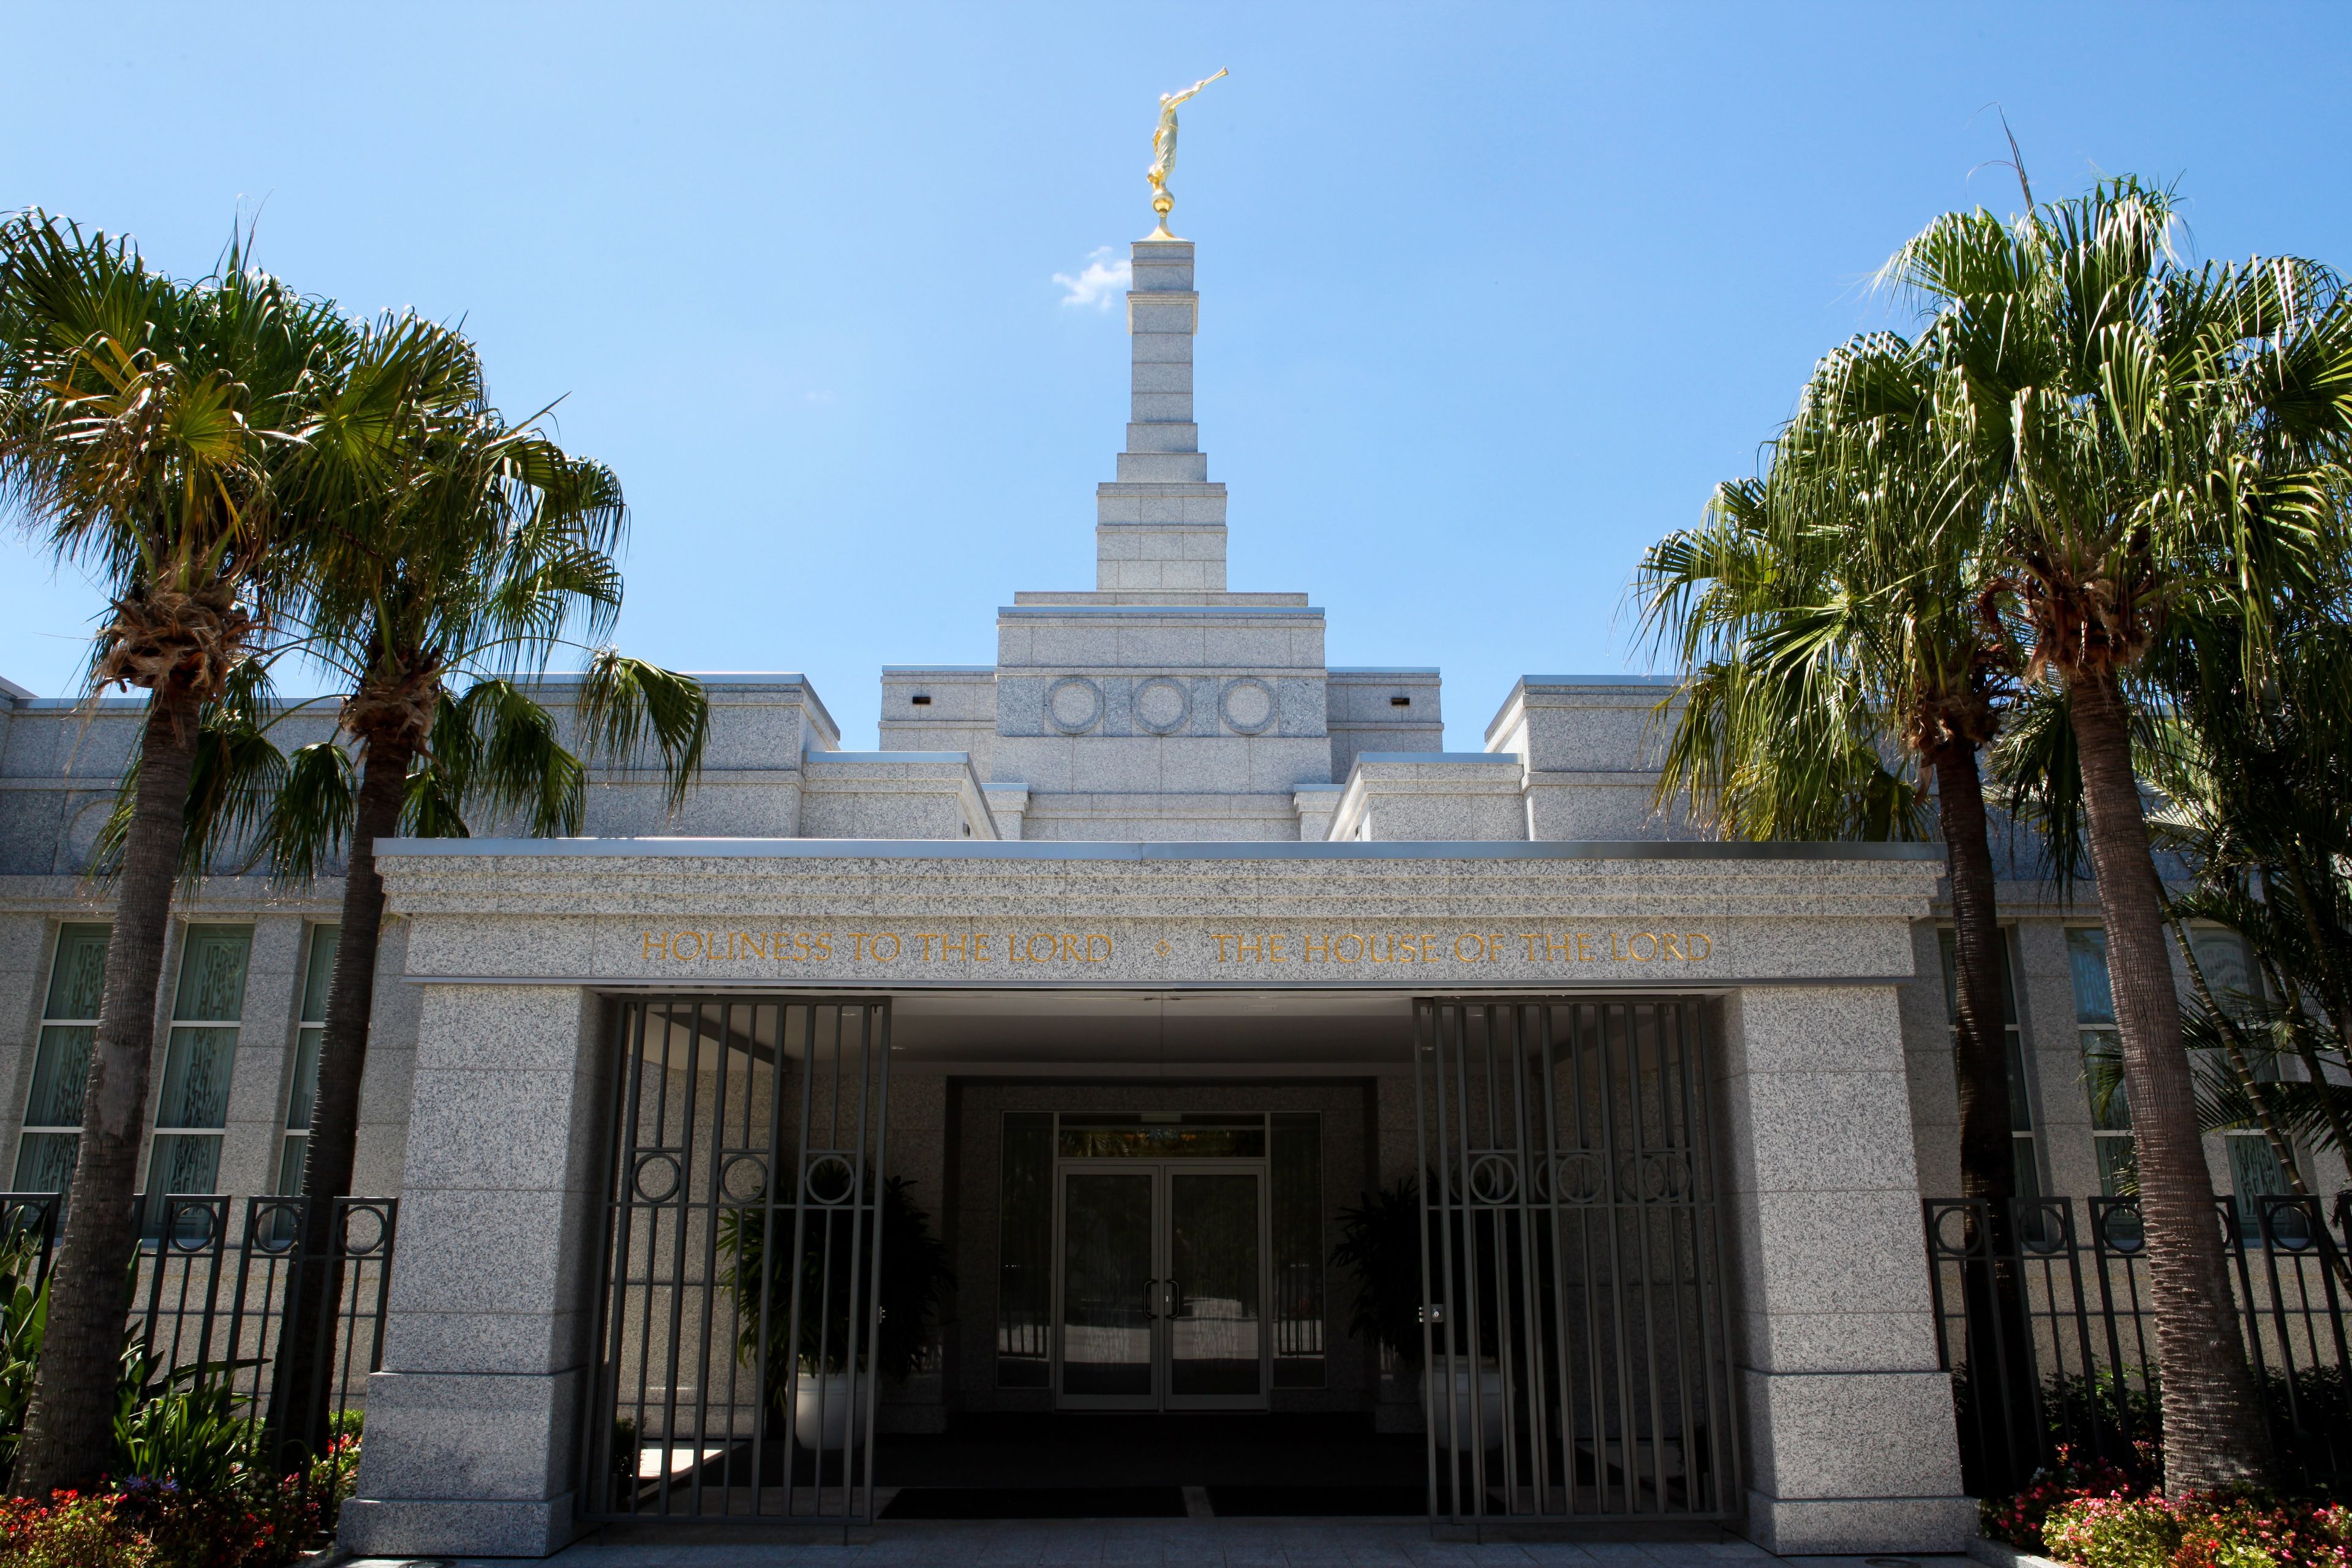 An exterior view of the front of the Brisbane Australia Temple.